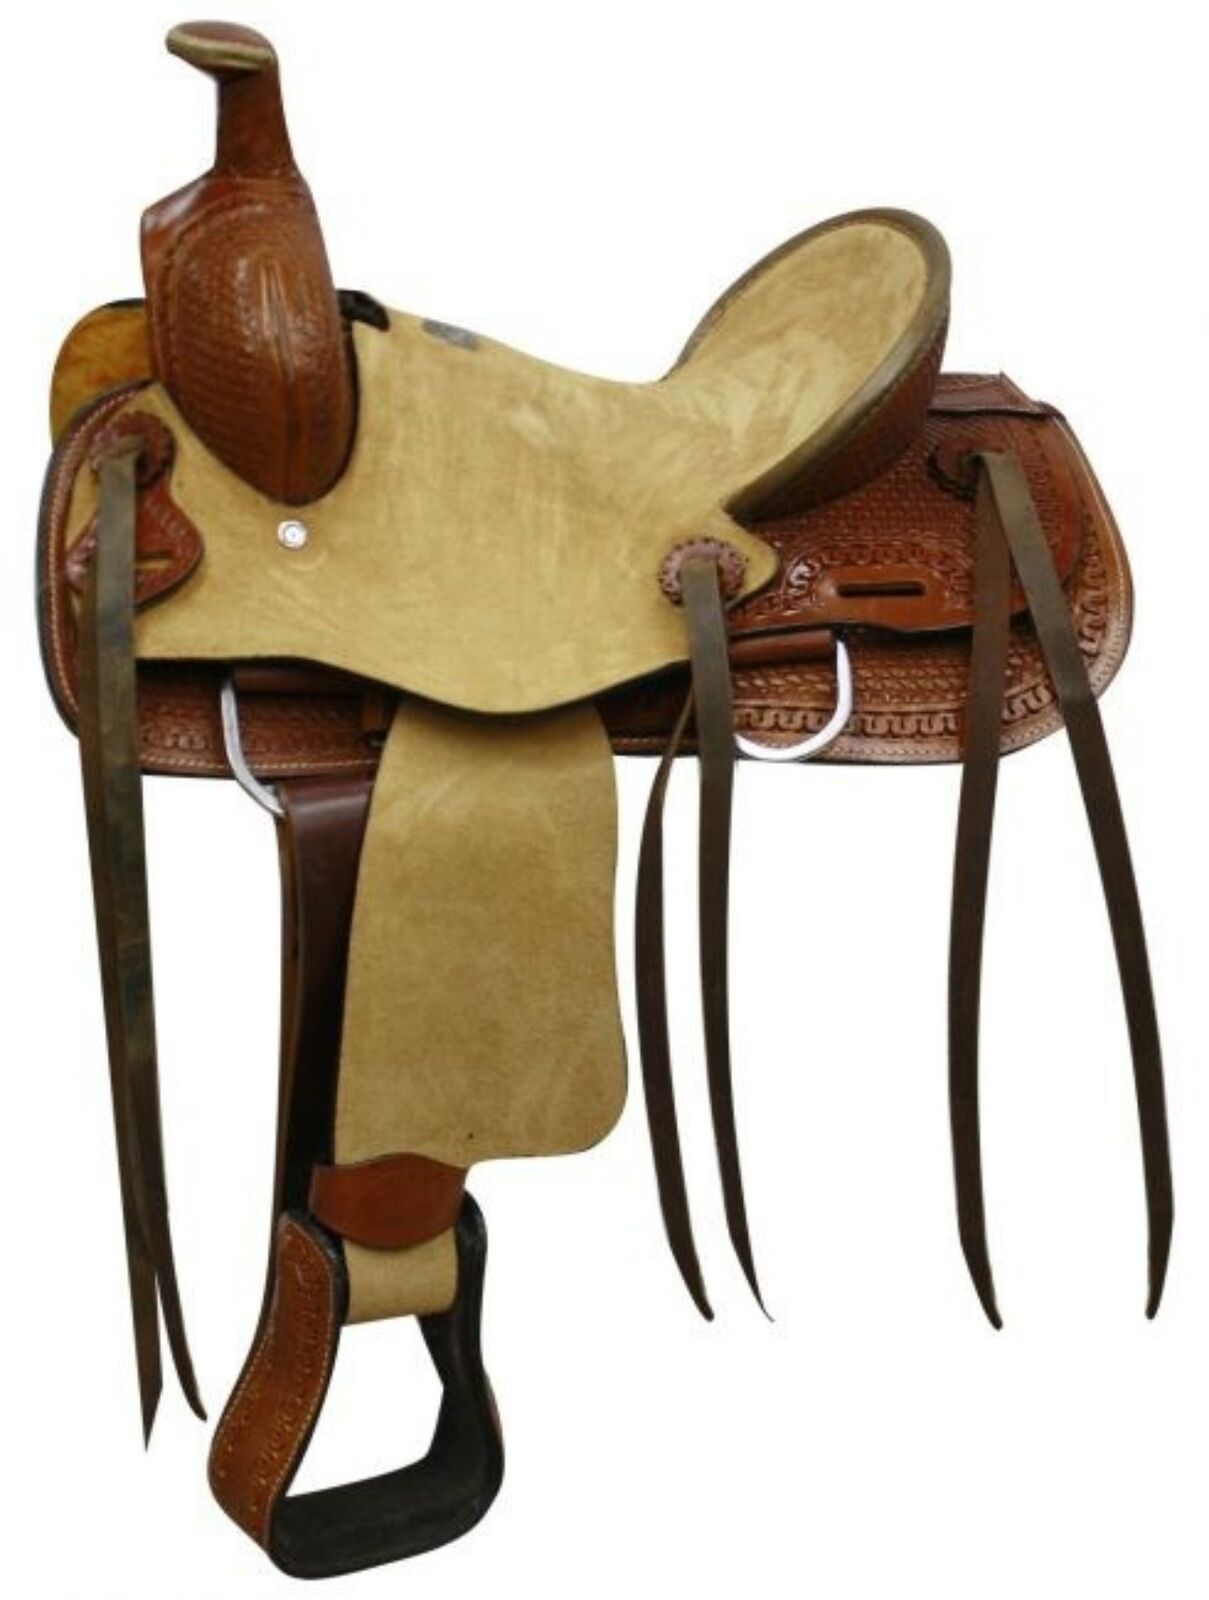 Double T 8" Pony Youth SHOW SADDLE Engraved SILVER Fully Tooled Leather SQHB